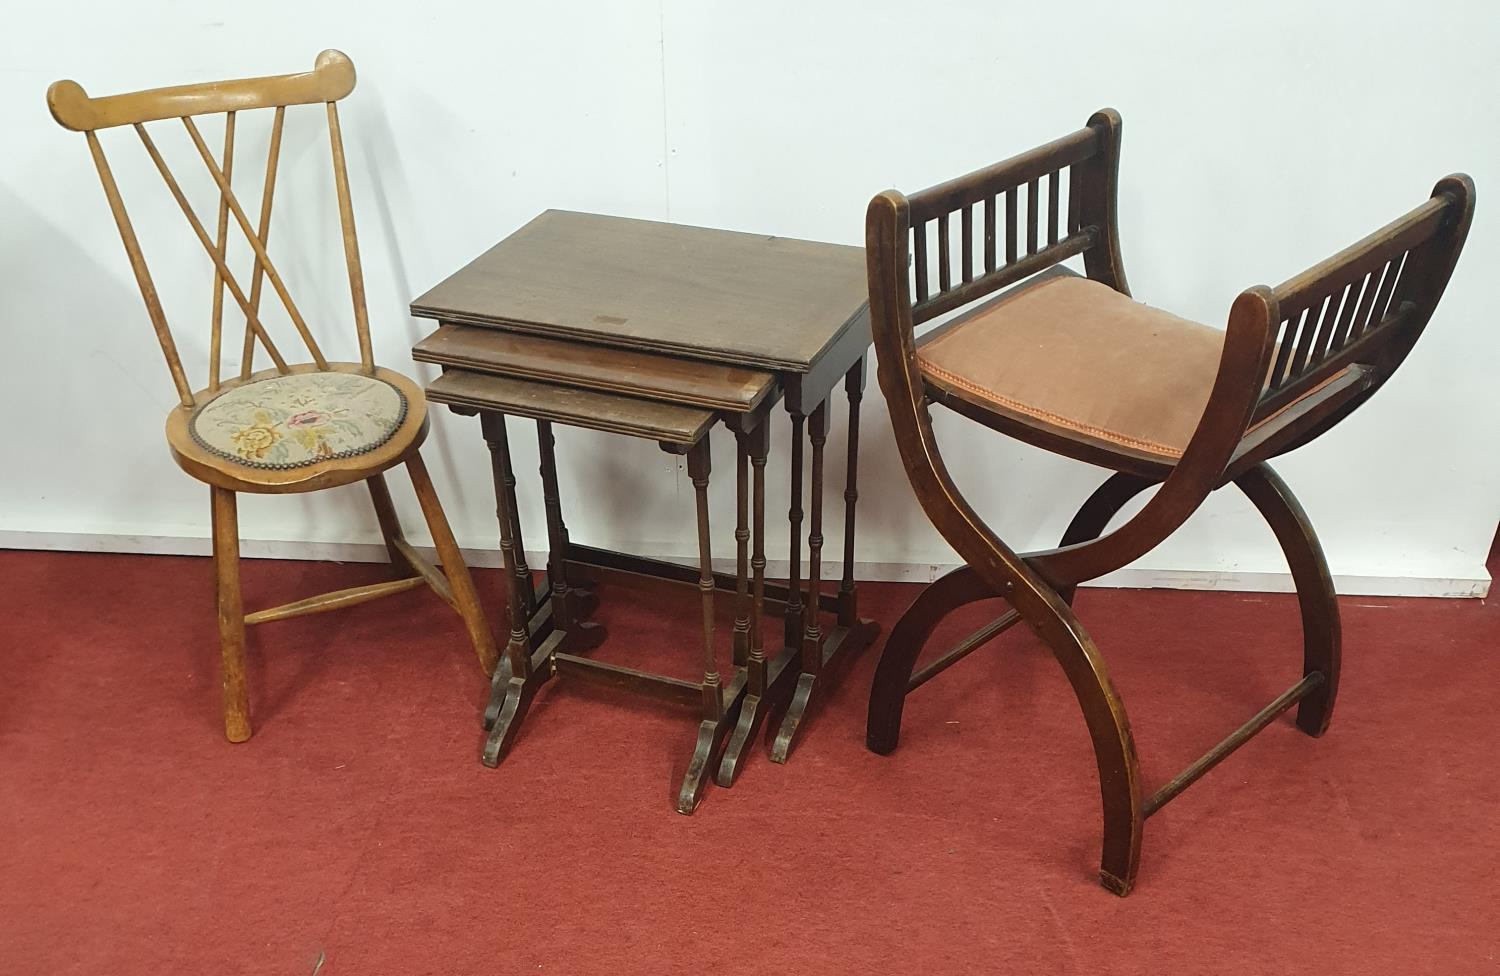 A good quantity of 19th Century and later Furniture.